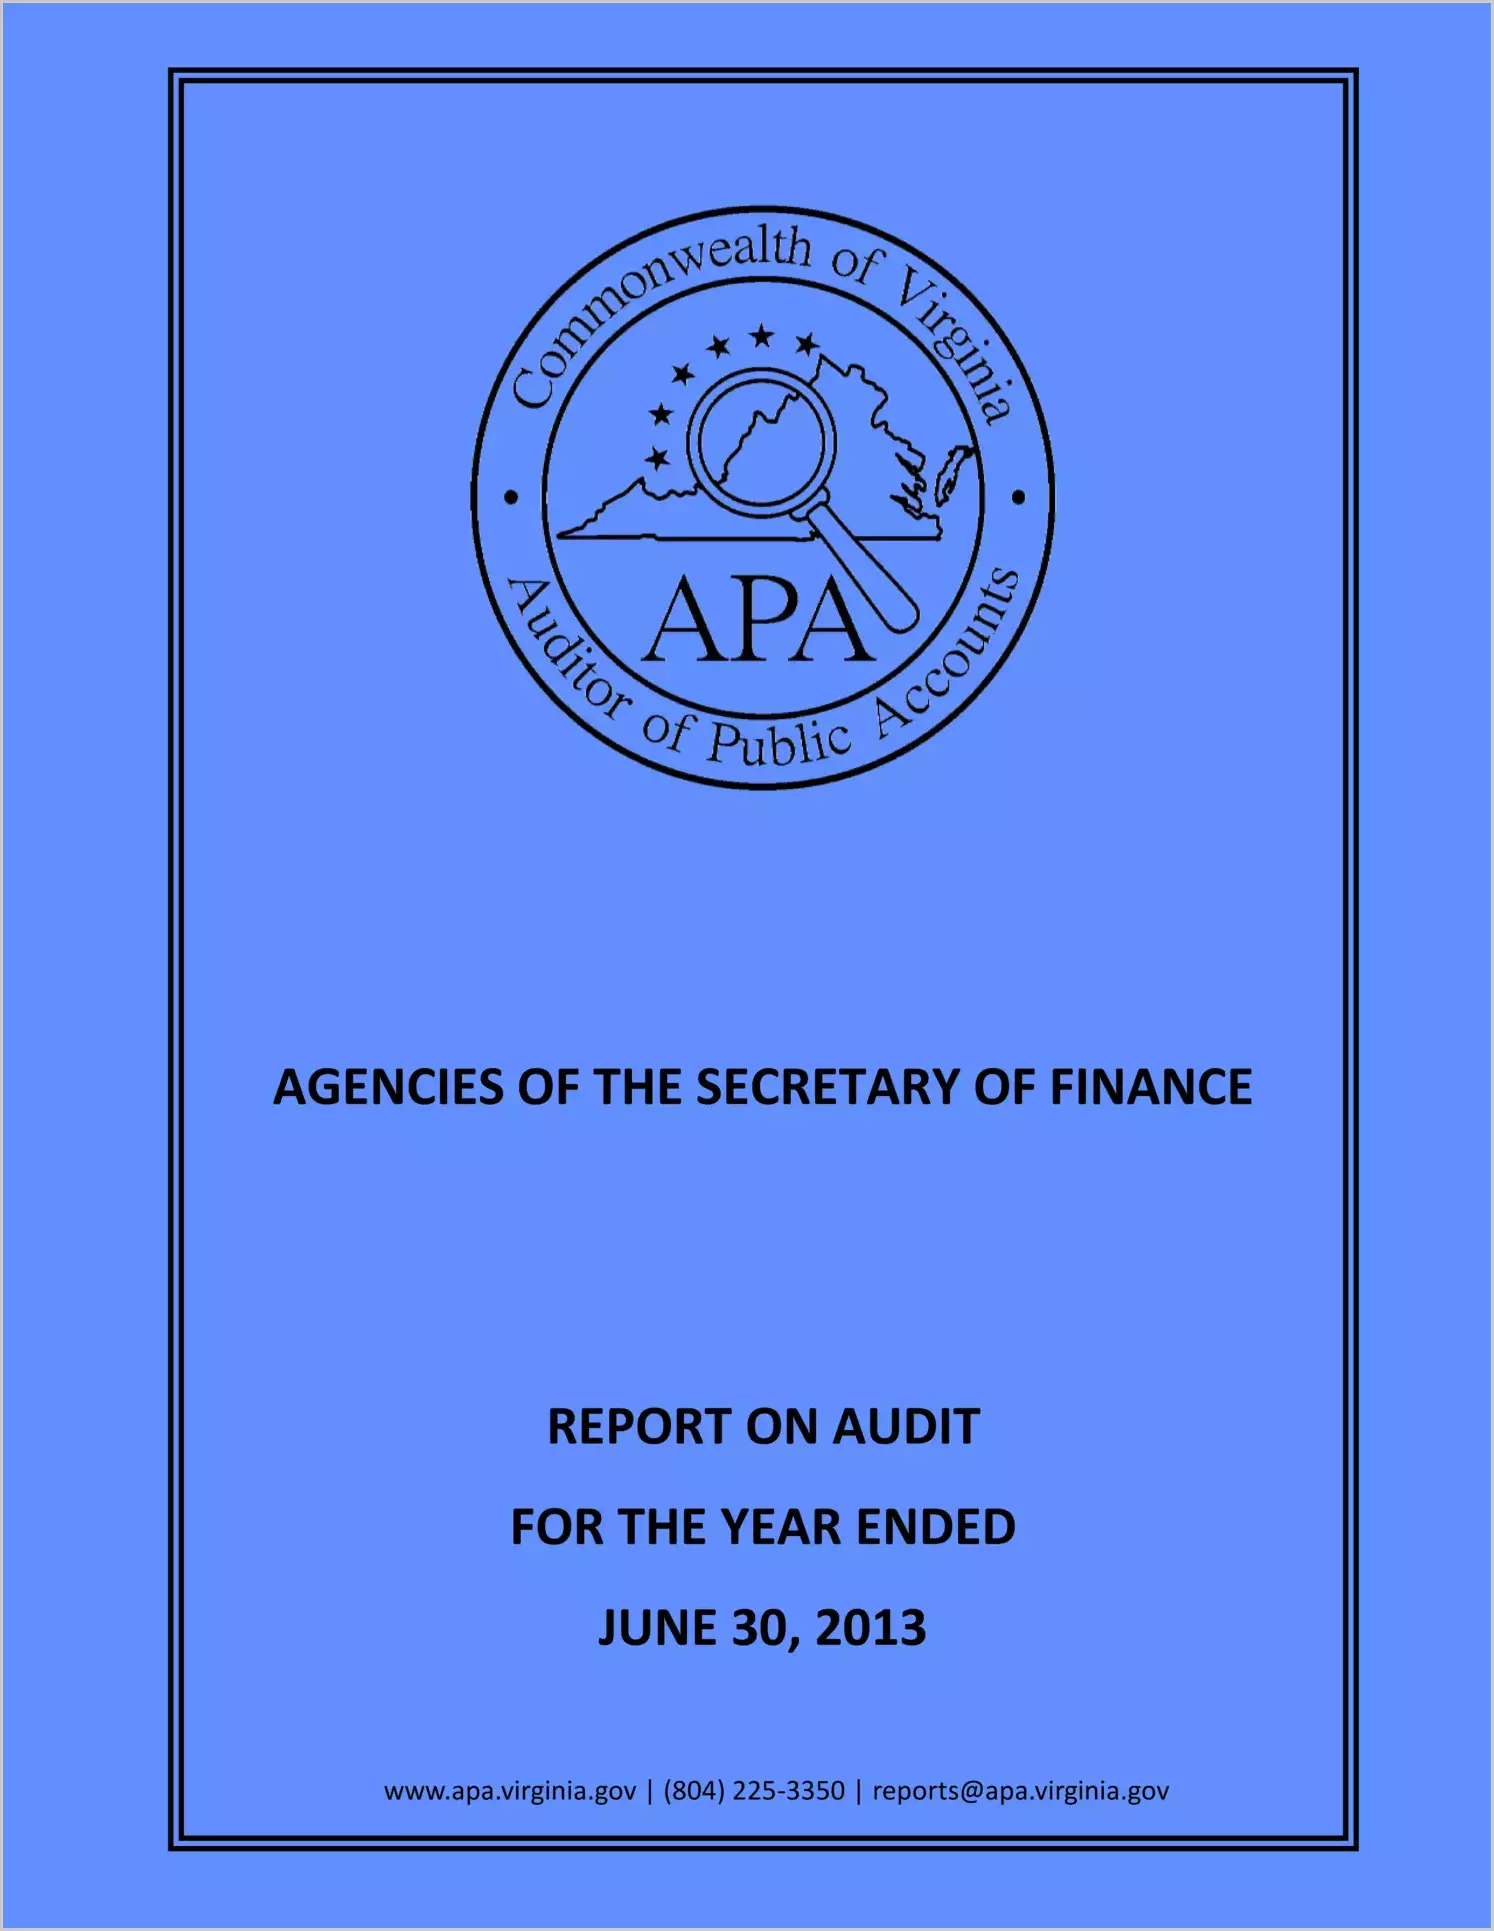 Agencies of the Secretary of Finance report on audit for the year ended June 30, 2013